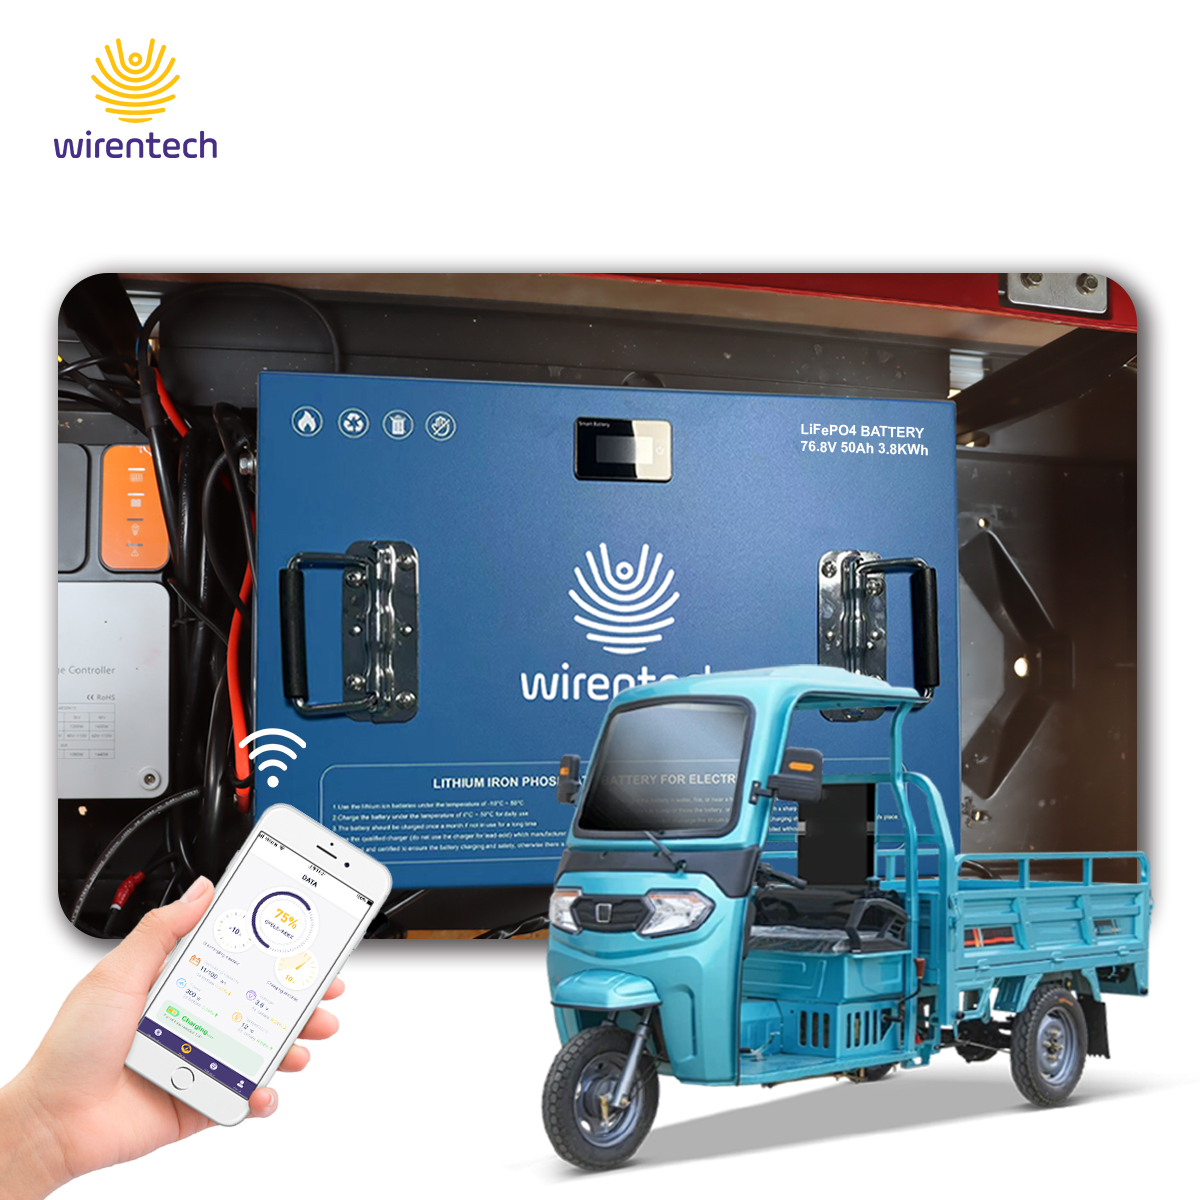 Wirentech 64V 76V Tricycle Battery: Leading The New Trend of Future Mobility